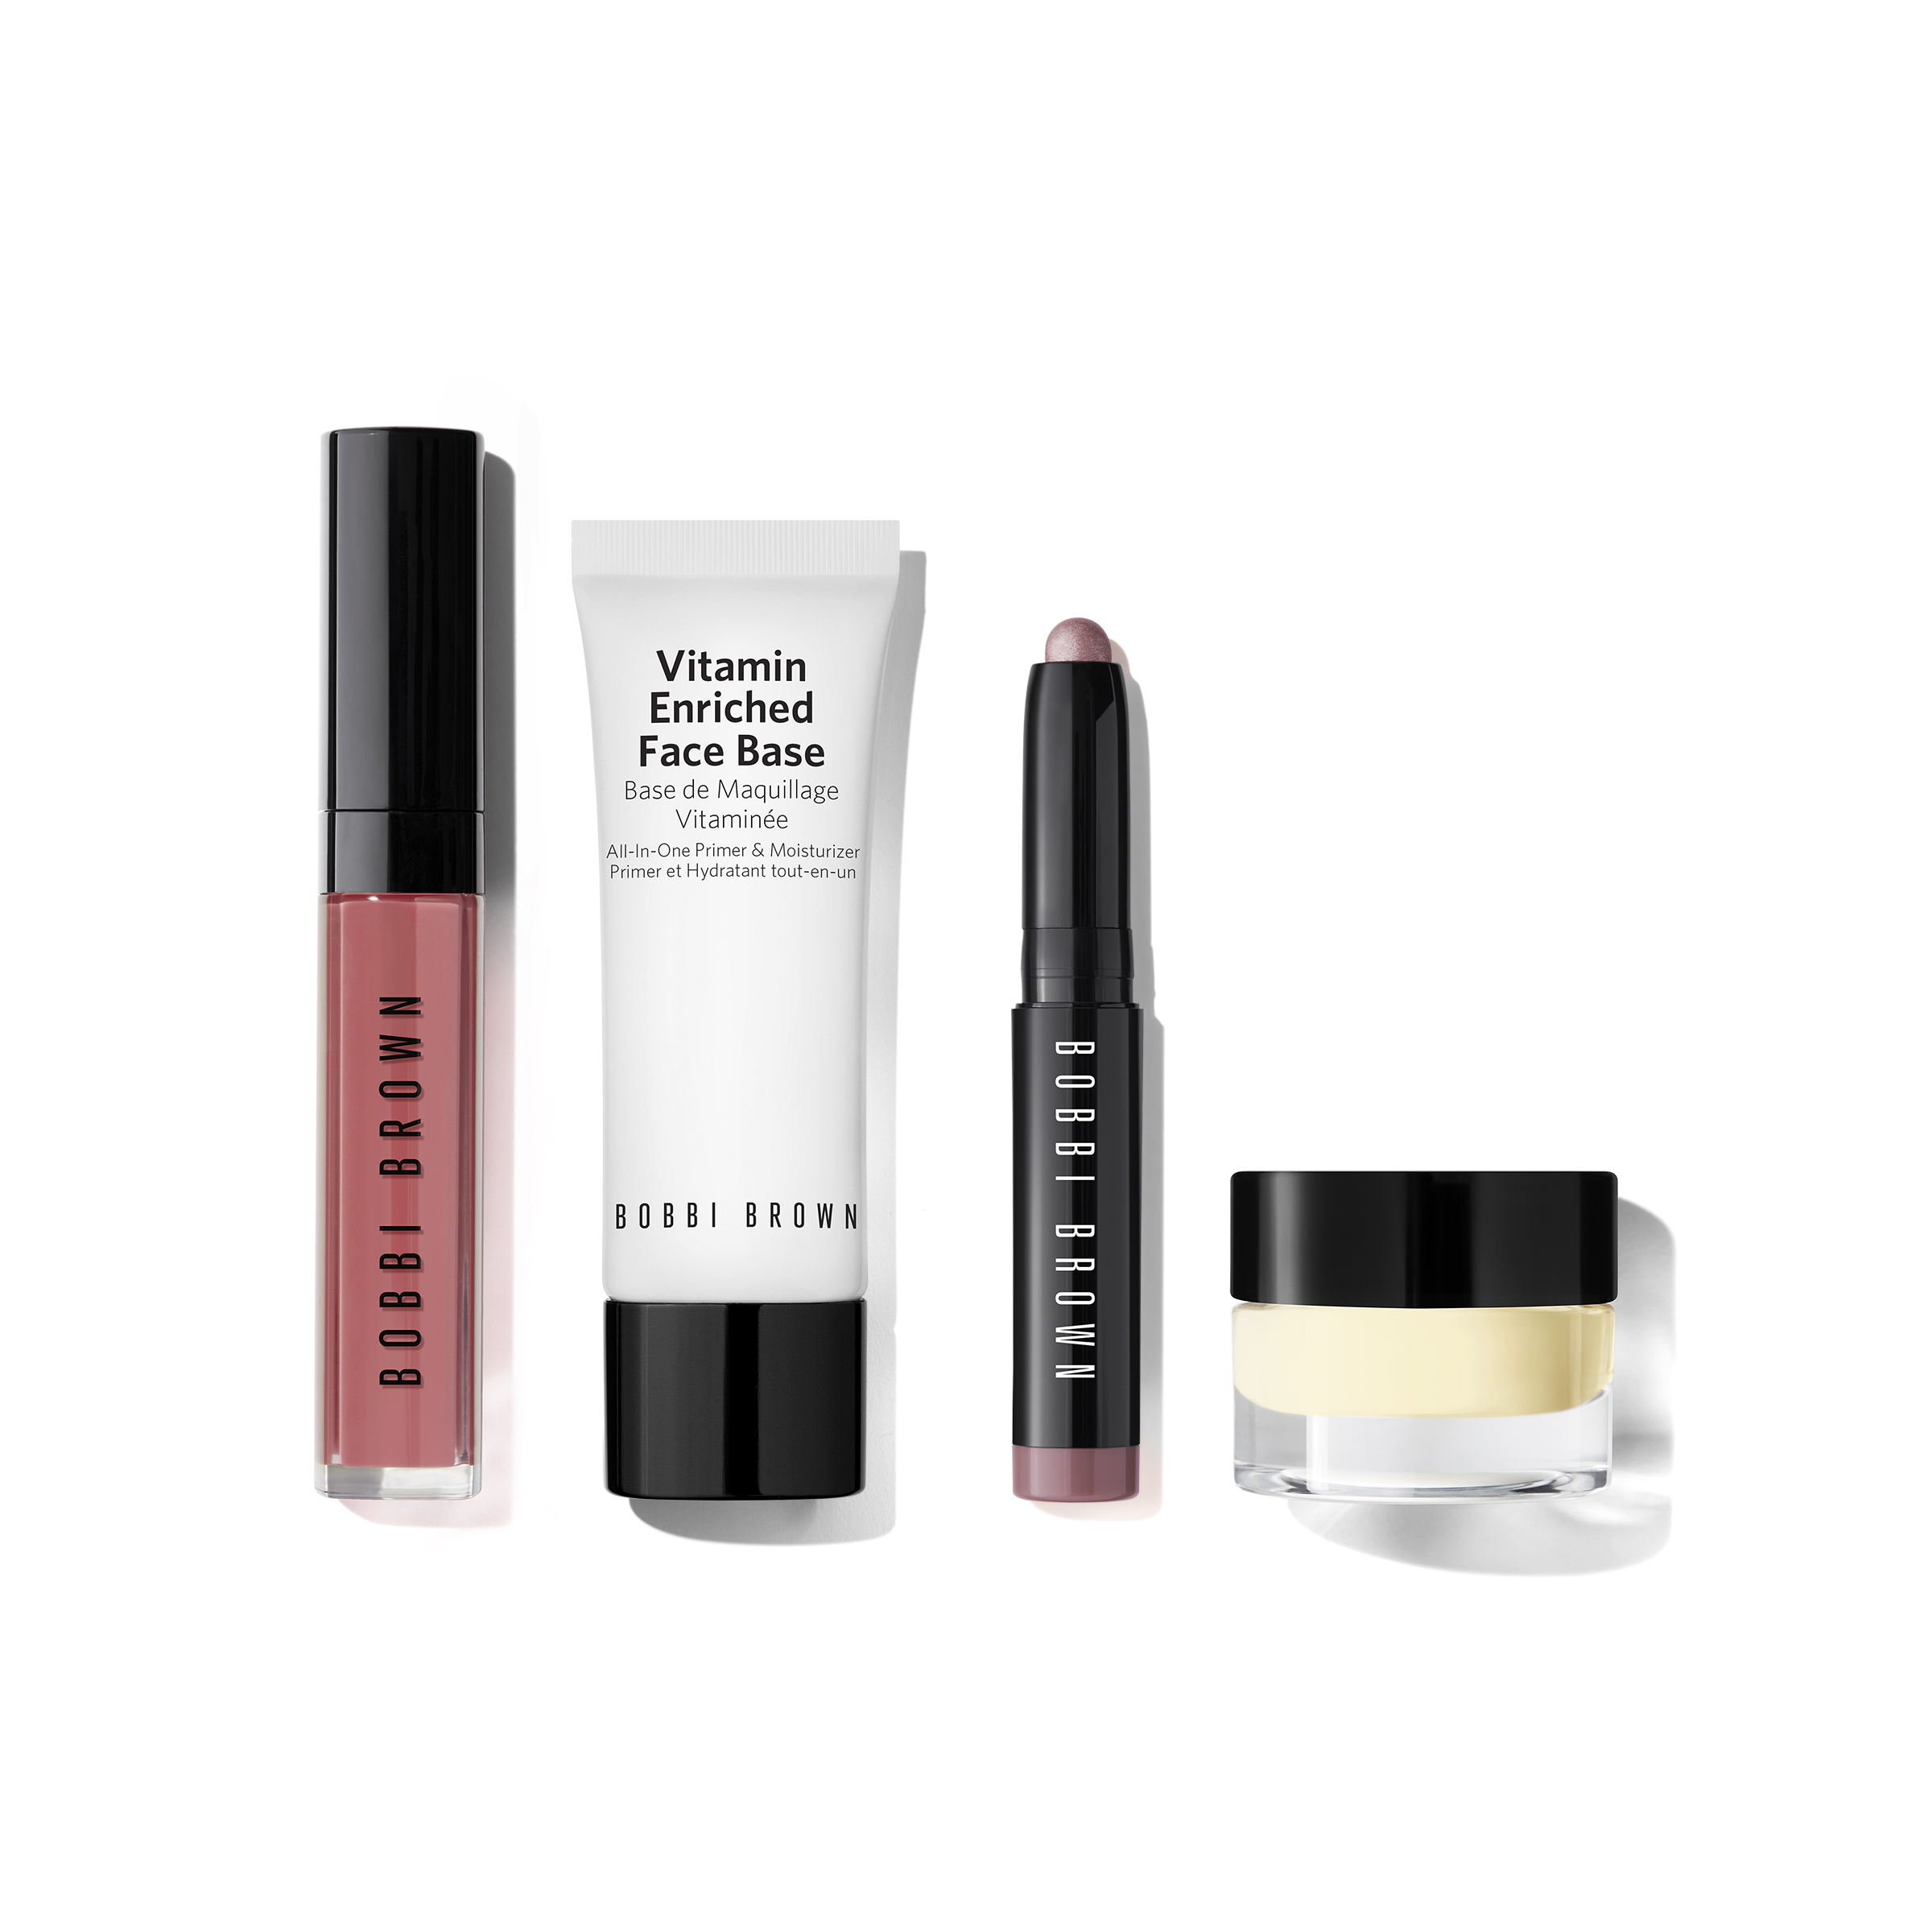 Receive a complimentary Bobbi Brown Four Ways to Perfect Set (worth €70) when you spend €90 on Bobbi Brown